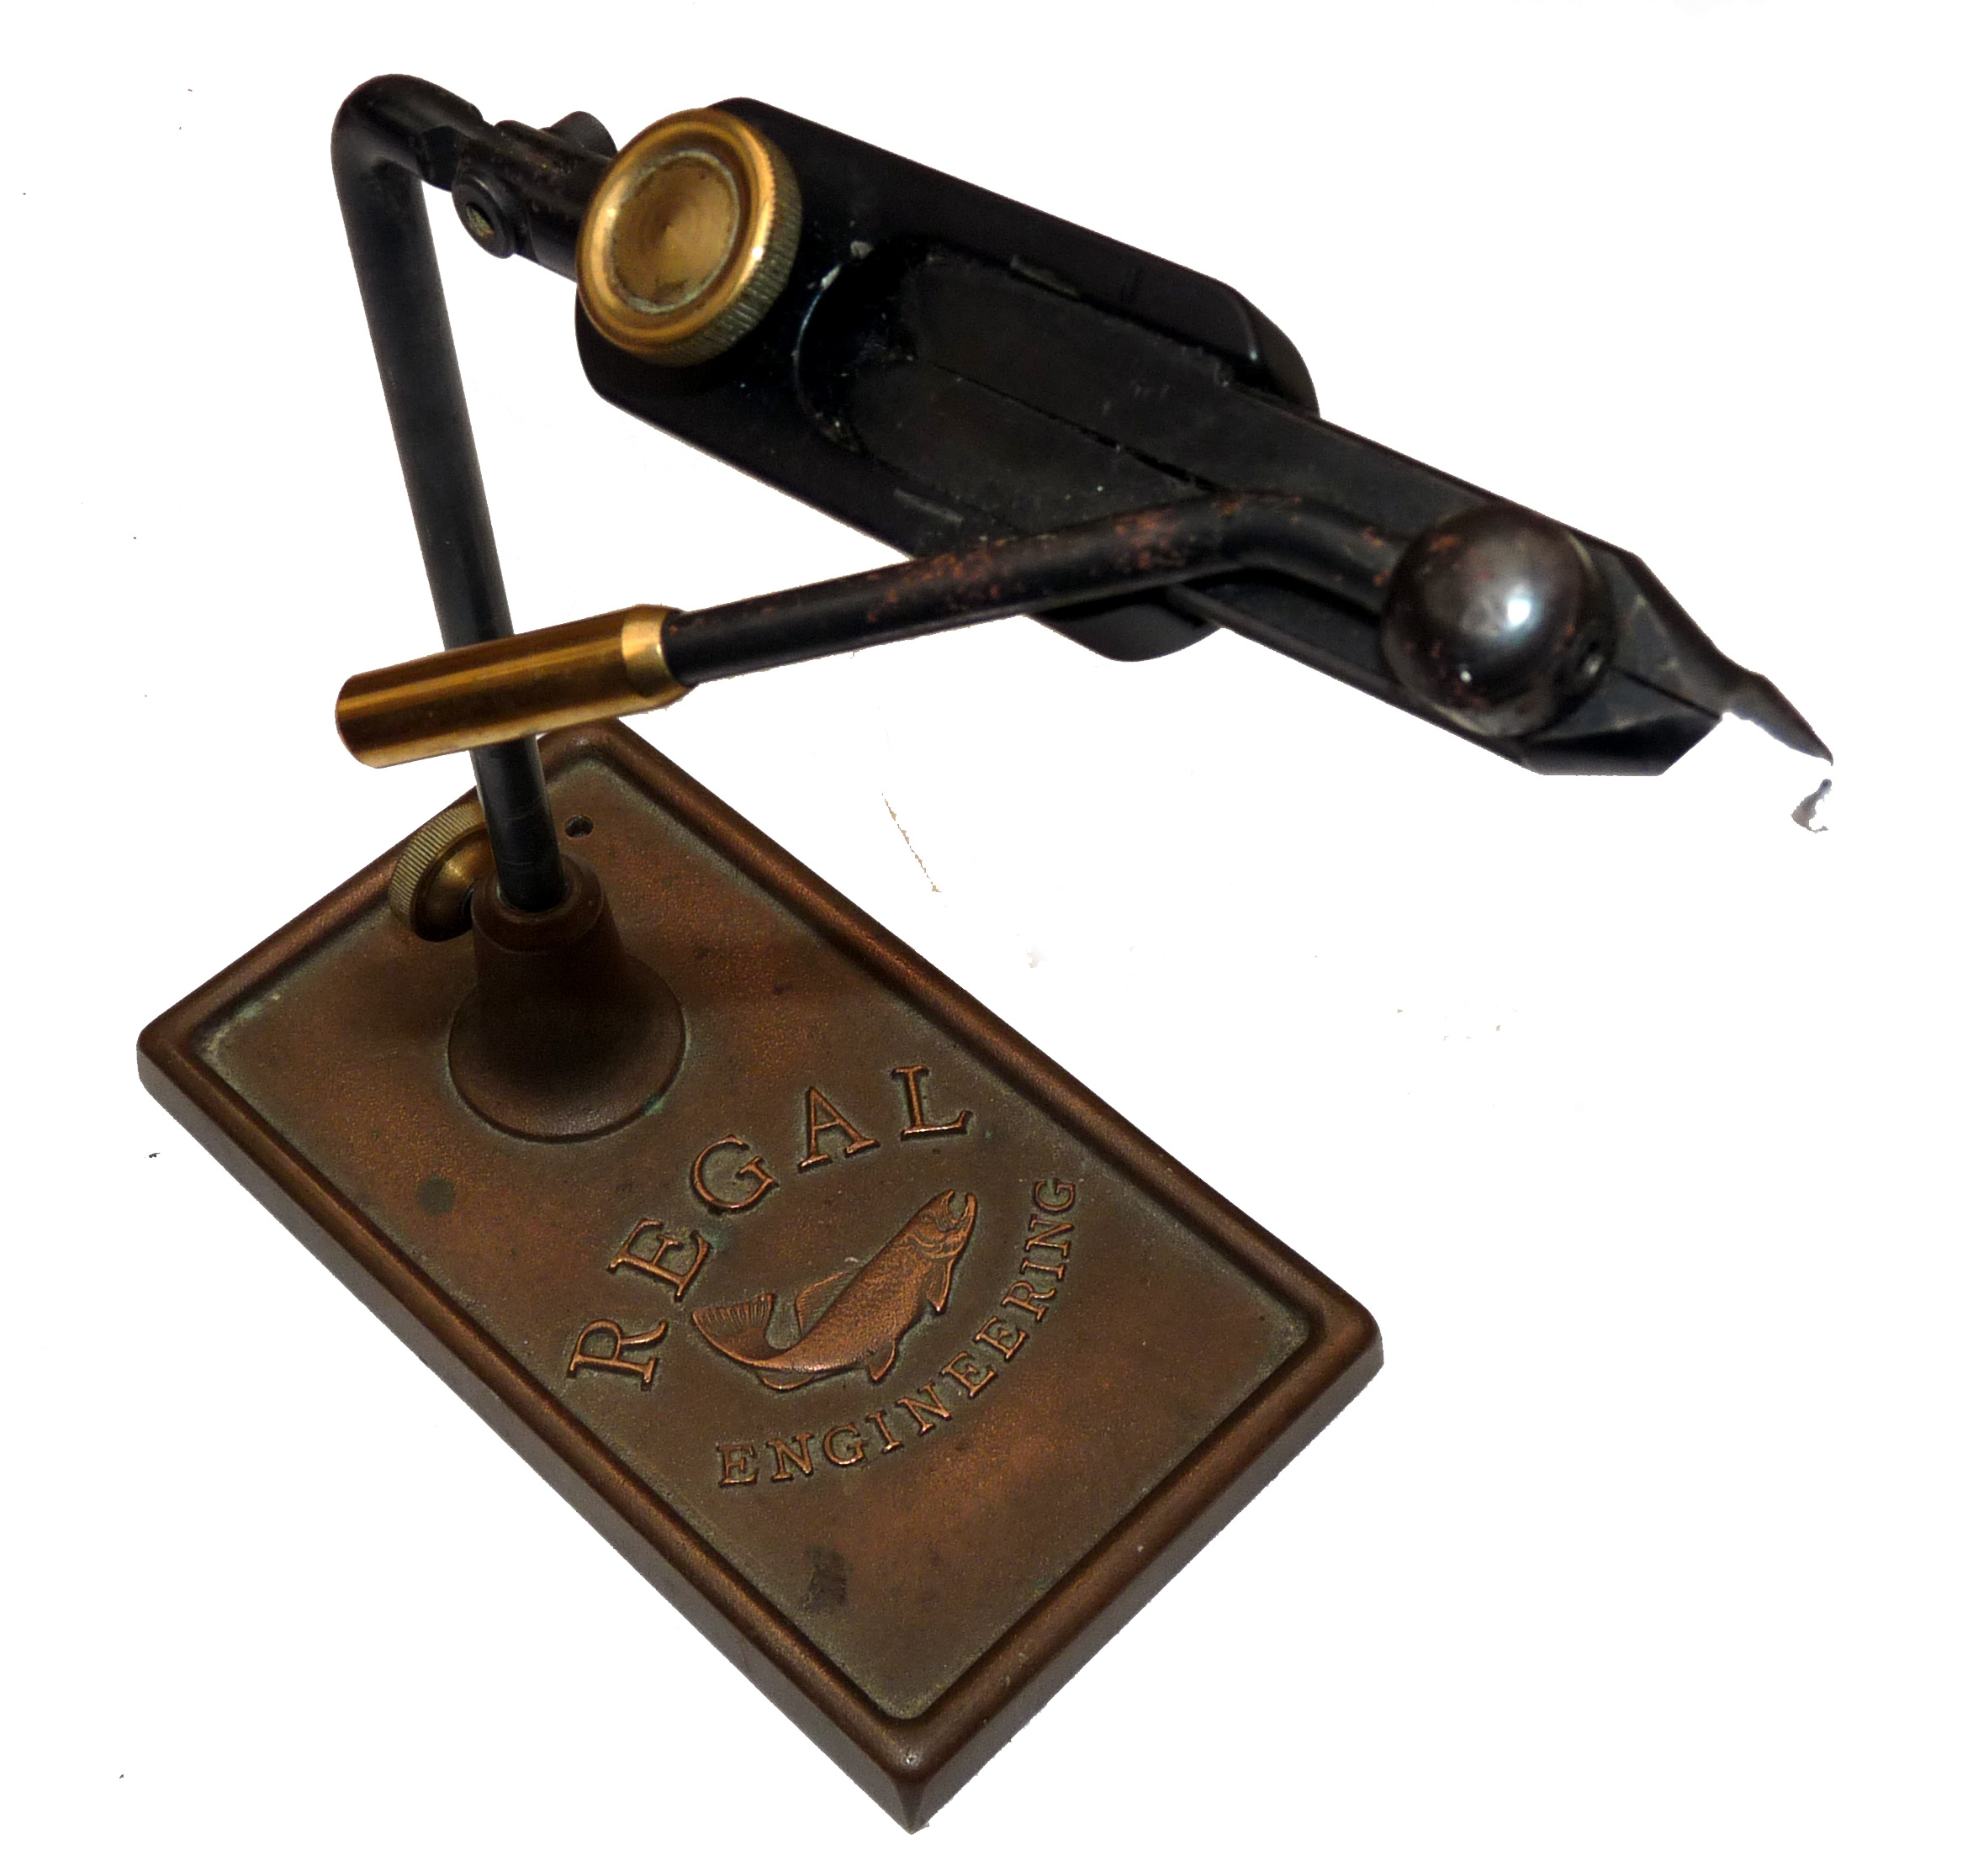 FLY VICE: Decorative fly tyer’s swivel head pro vice, standing 9” tall with lever lock jaws,